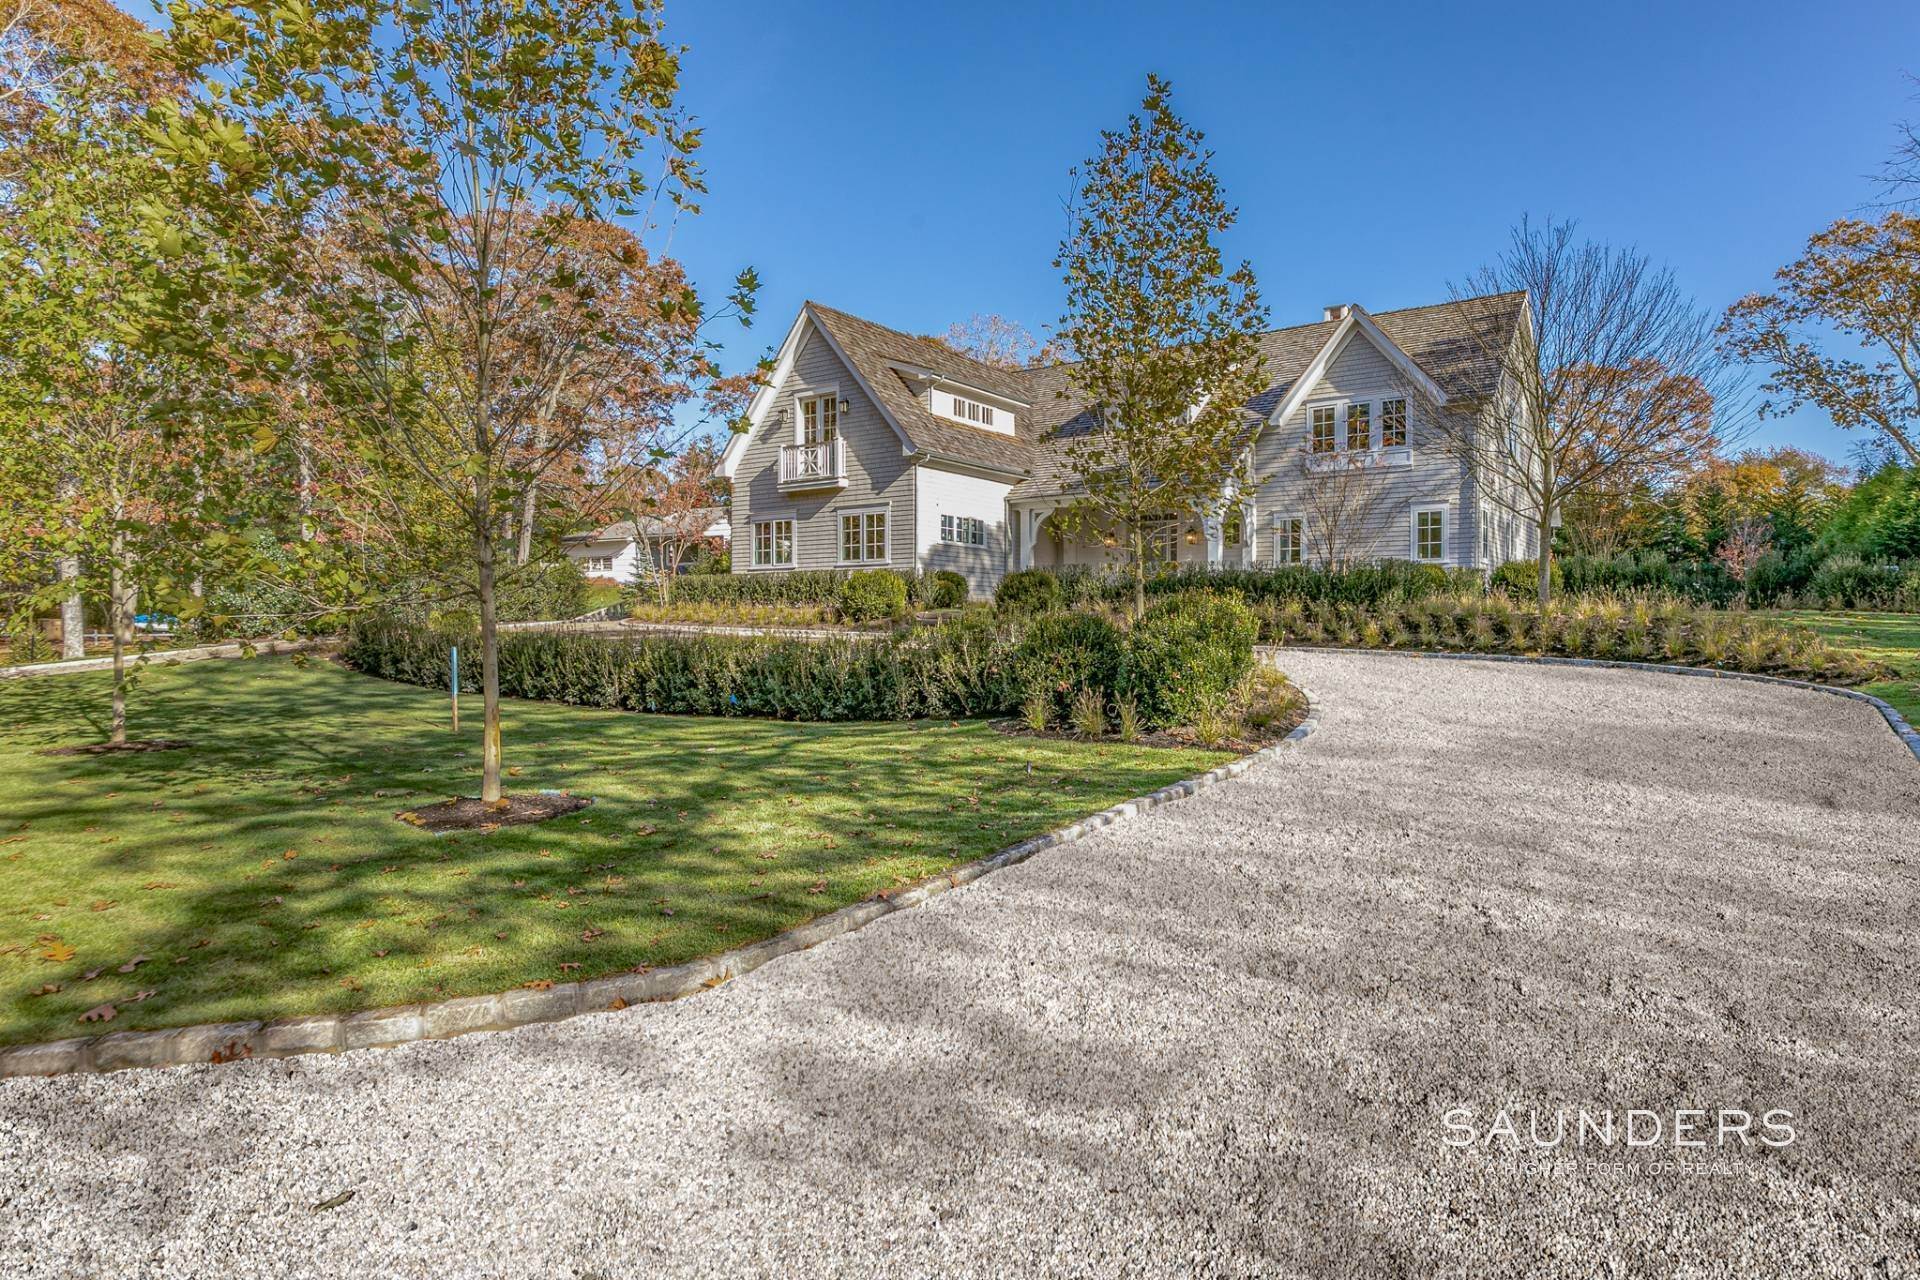 1. Single Family Homes for Sale at Finished And Fabulous New Construction On Cove Hollow 58 Cove Hollow Road, East Hampton, NY 11937